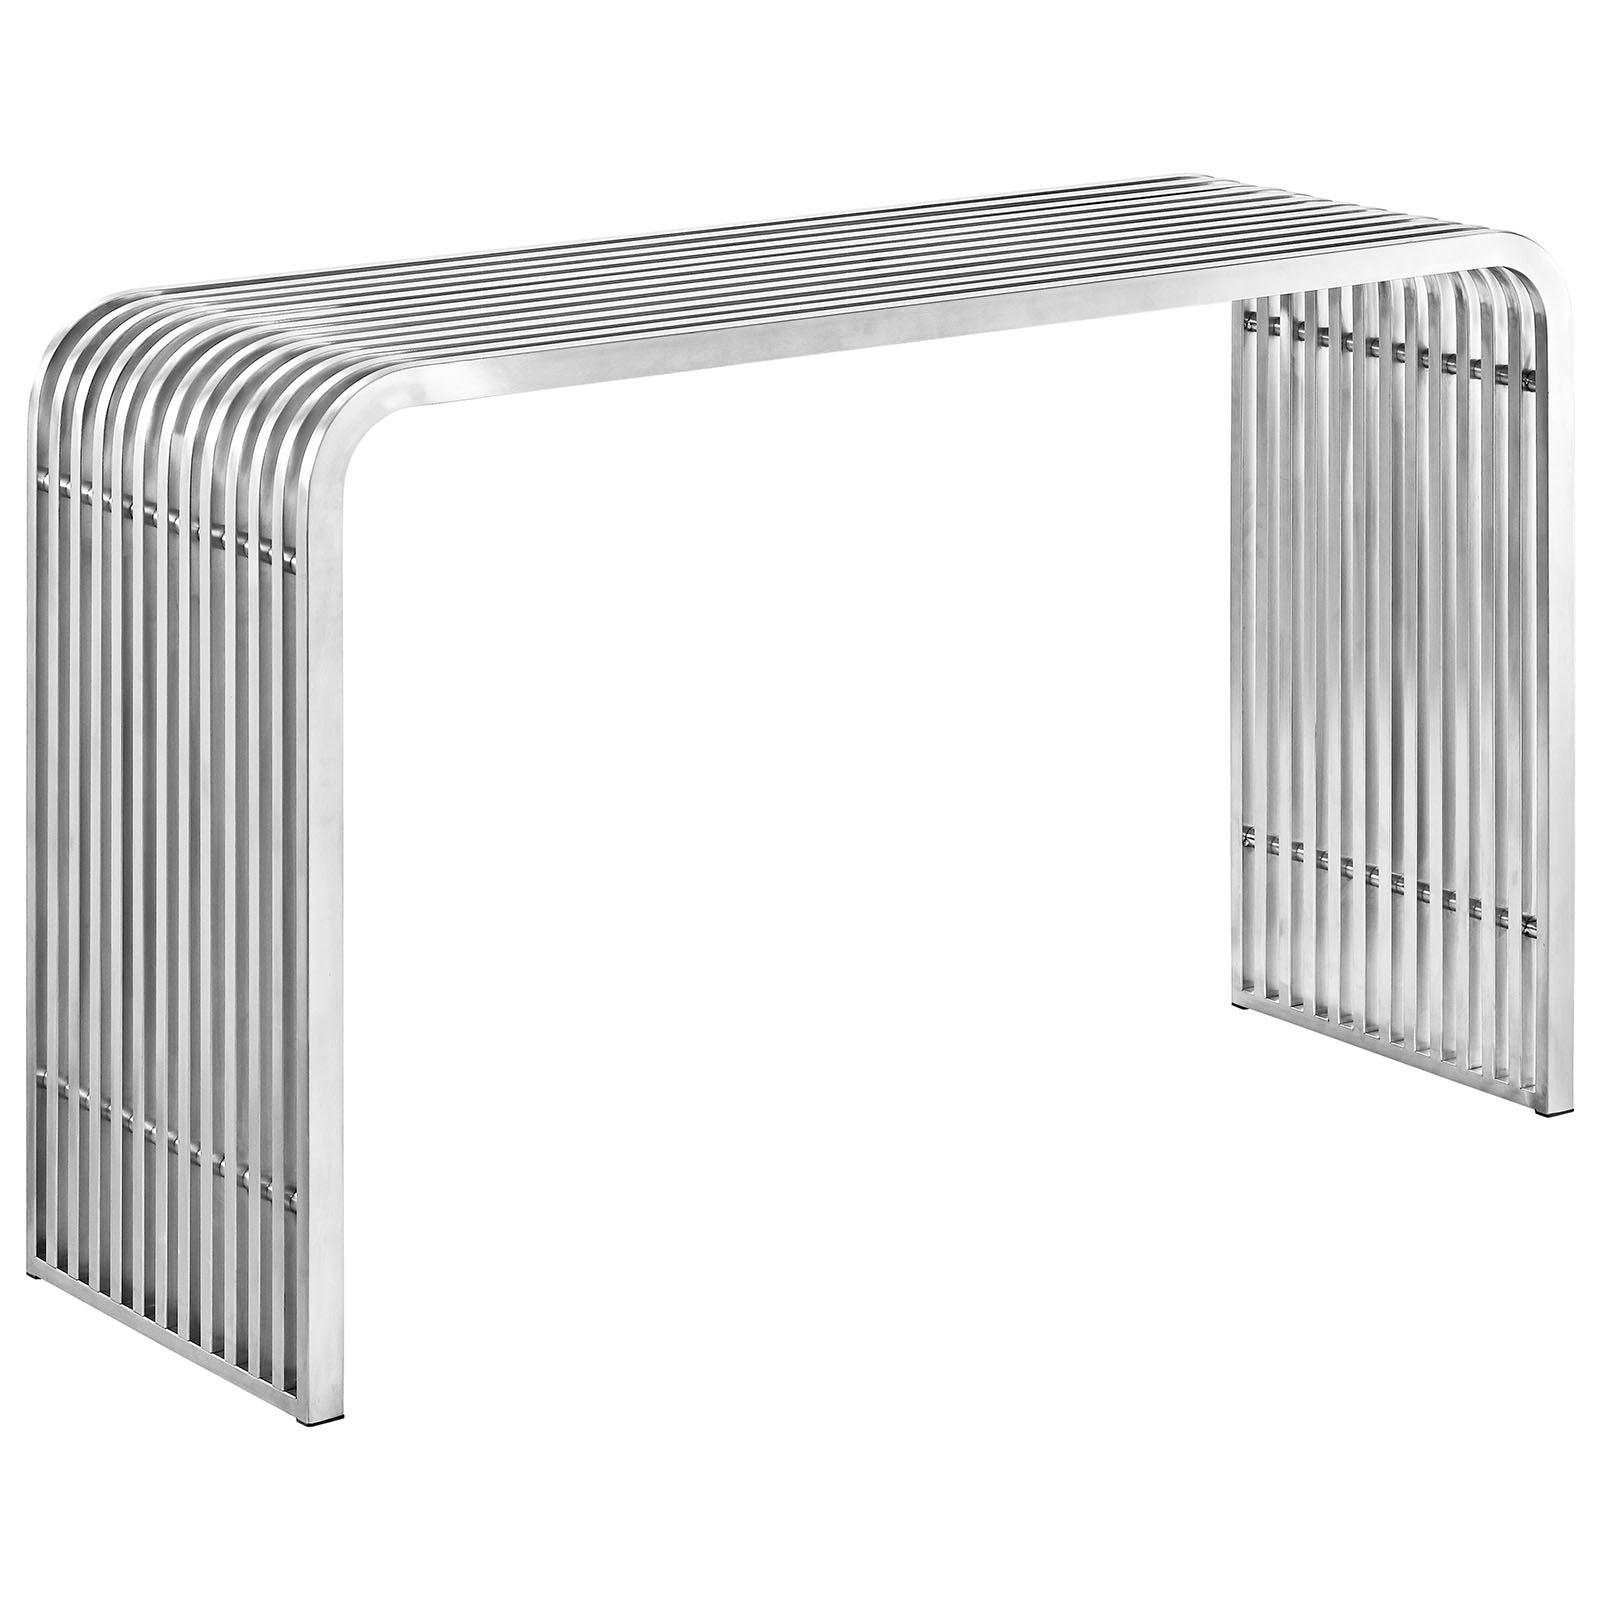 Pipe Stainless Steel Console Table-Console Table-Modway-Wall2Wall Furnishings